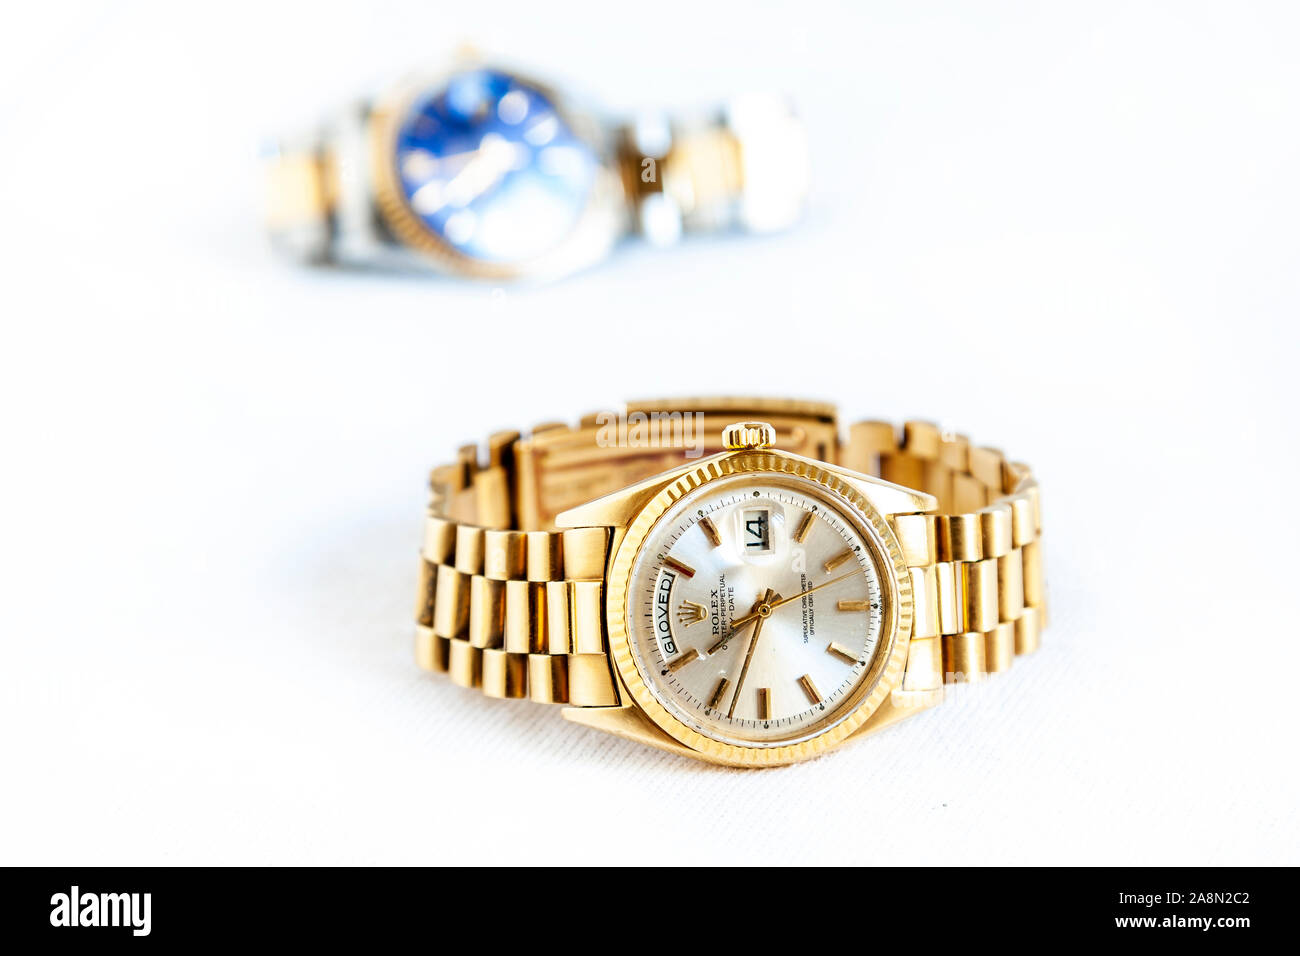 CREMONA, ITALY - MARCH, 2019: Rolex Oyster Perpetual Day- Date watch on white background. Rolex SA is an important Swiss luxury company in the product Stock Photo